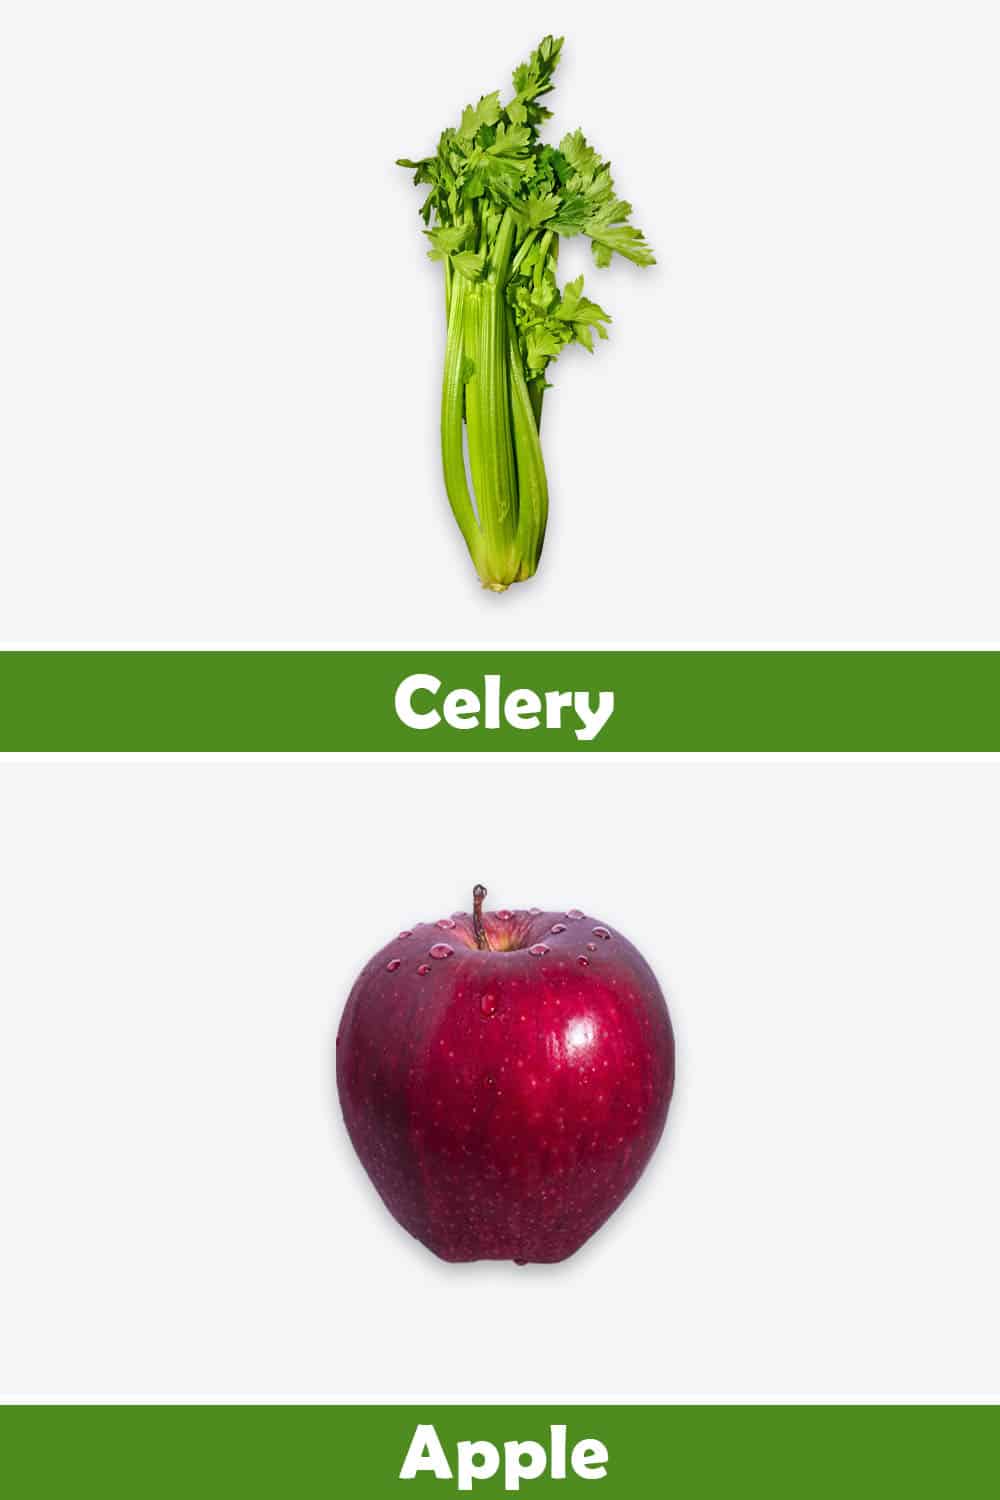 CELERY AND APPLE